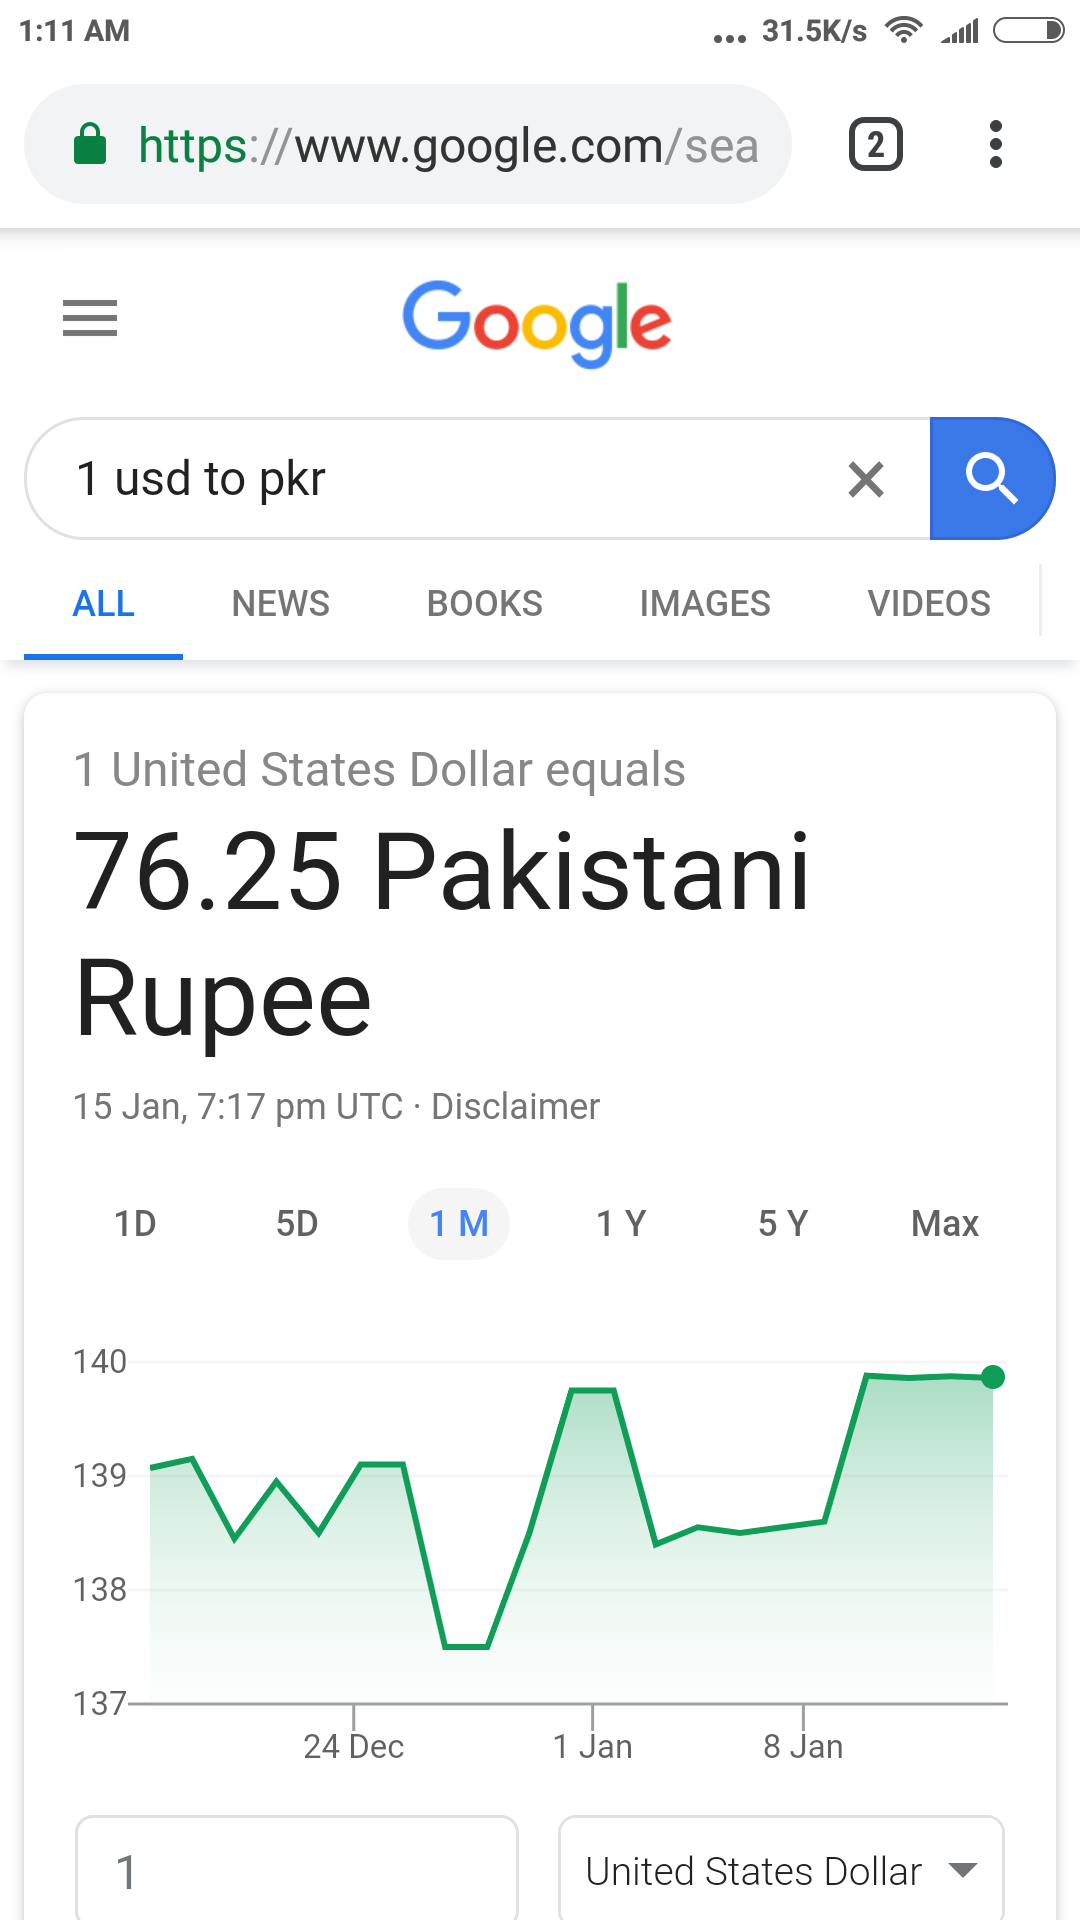 1 USD is equals to 76.25 Pakistani rupees according to Google: is it a bug?